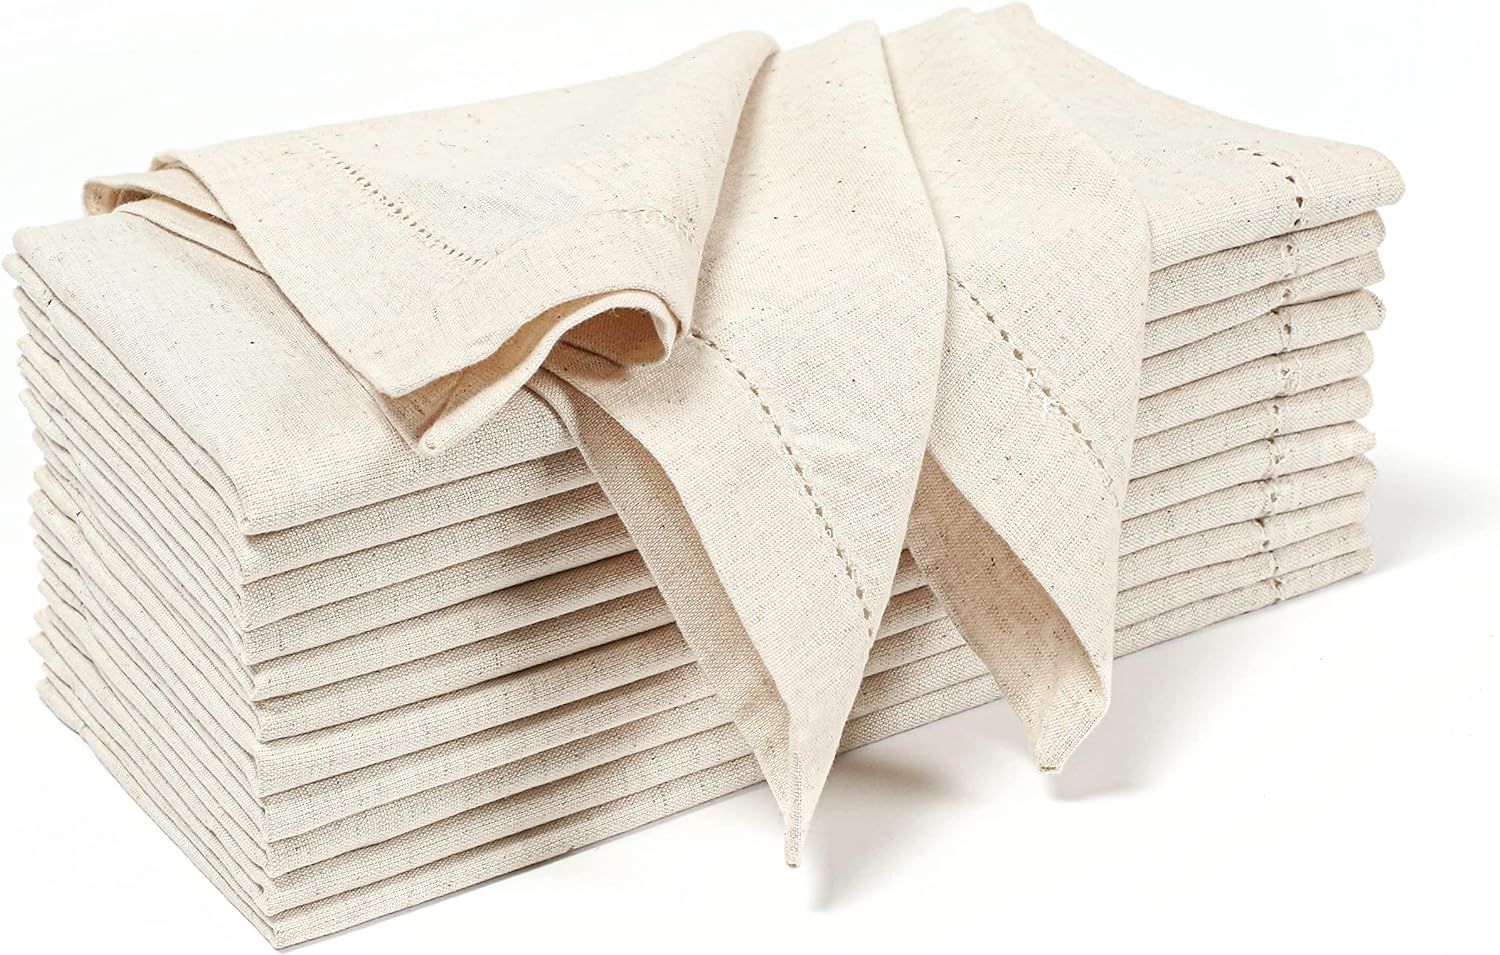 Hausattire Cloth Dinner Napkins in Cotton Flax Fabric with Hemstitched Detailing & Mitered Corner... | Amazon (US)